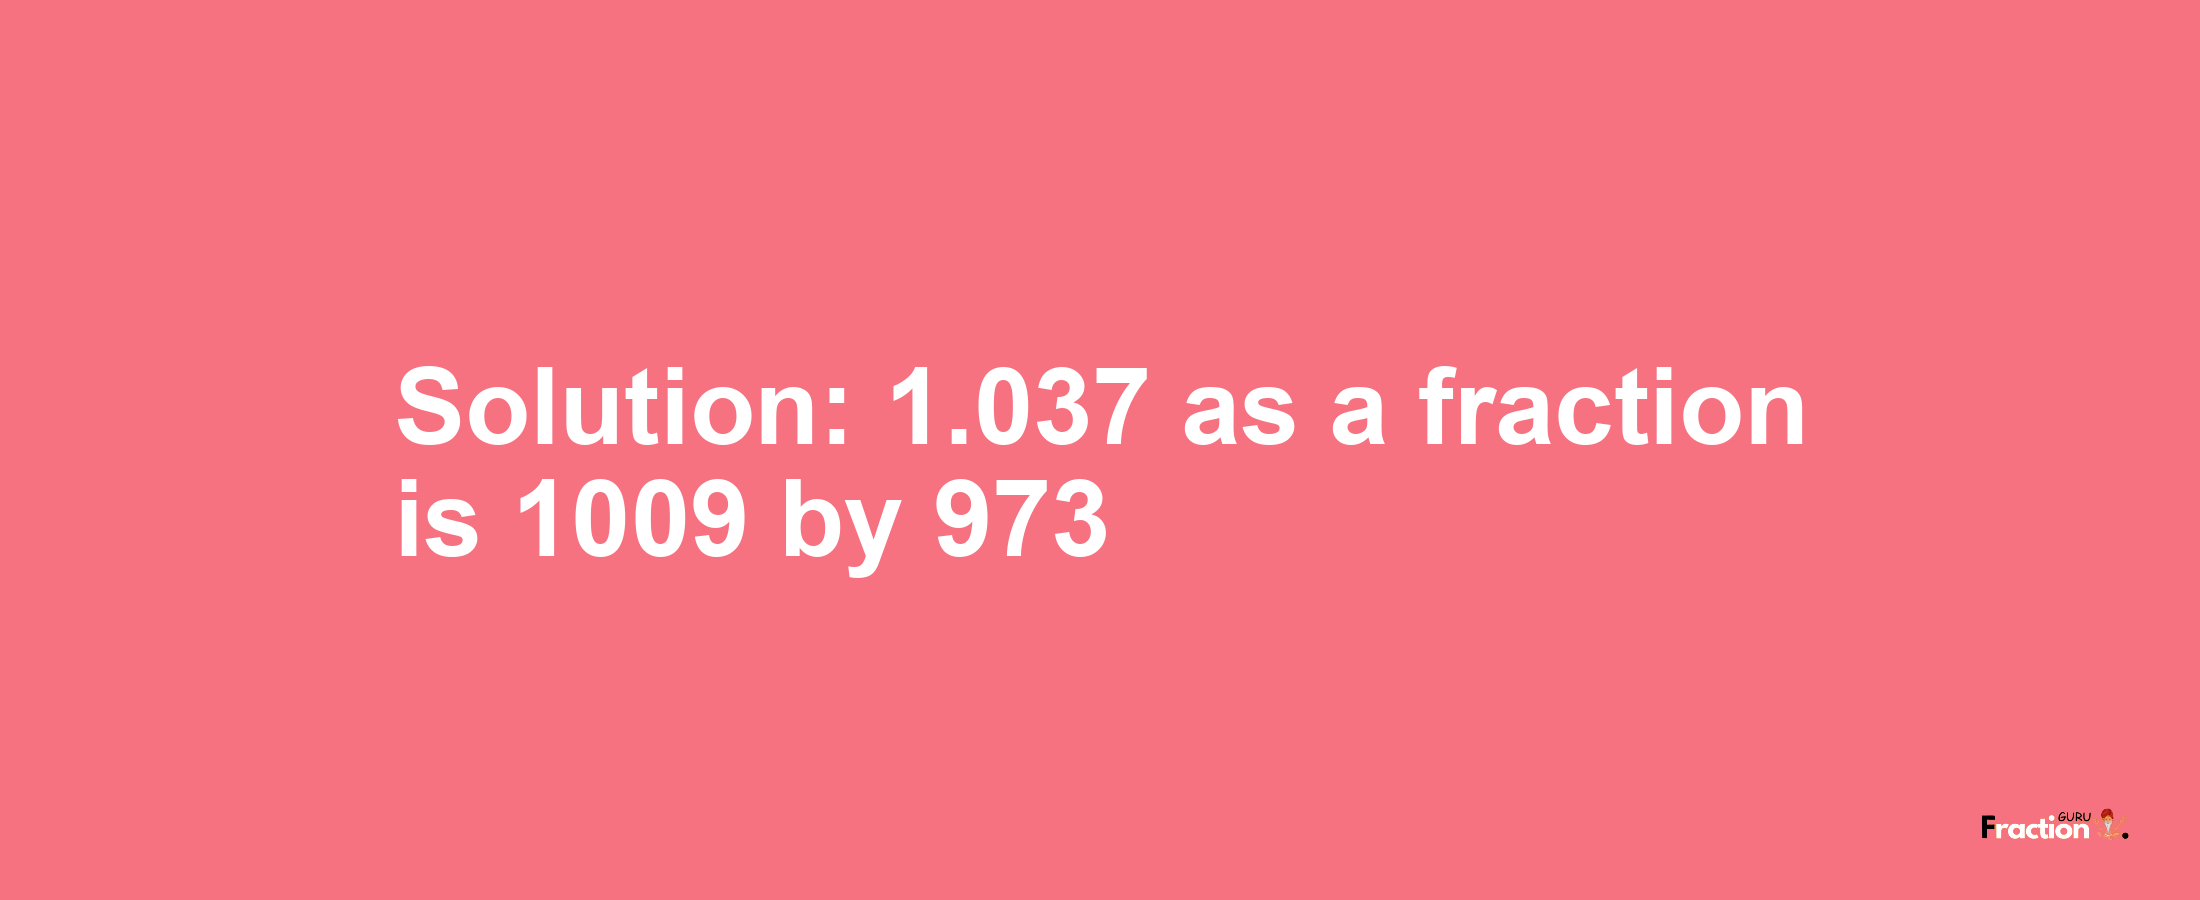 Solution:1.037 as a fraction is 1009/973